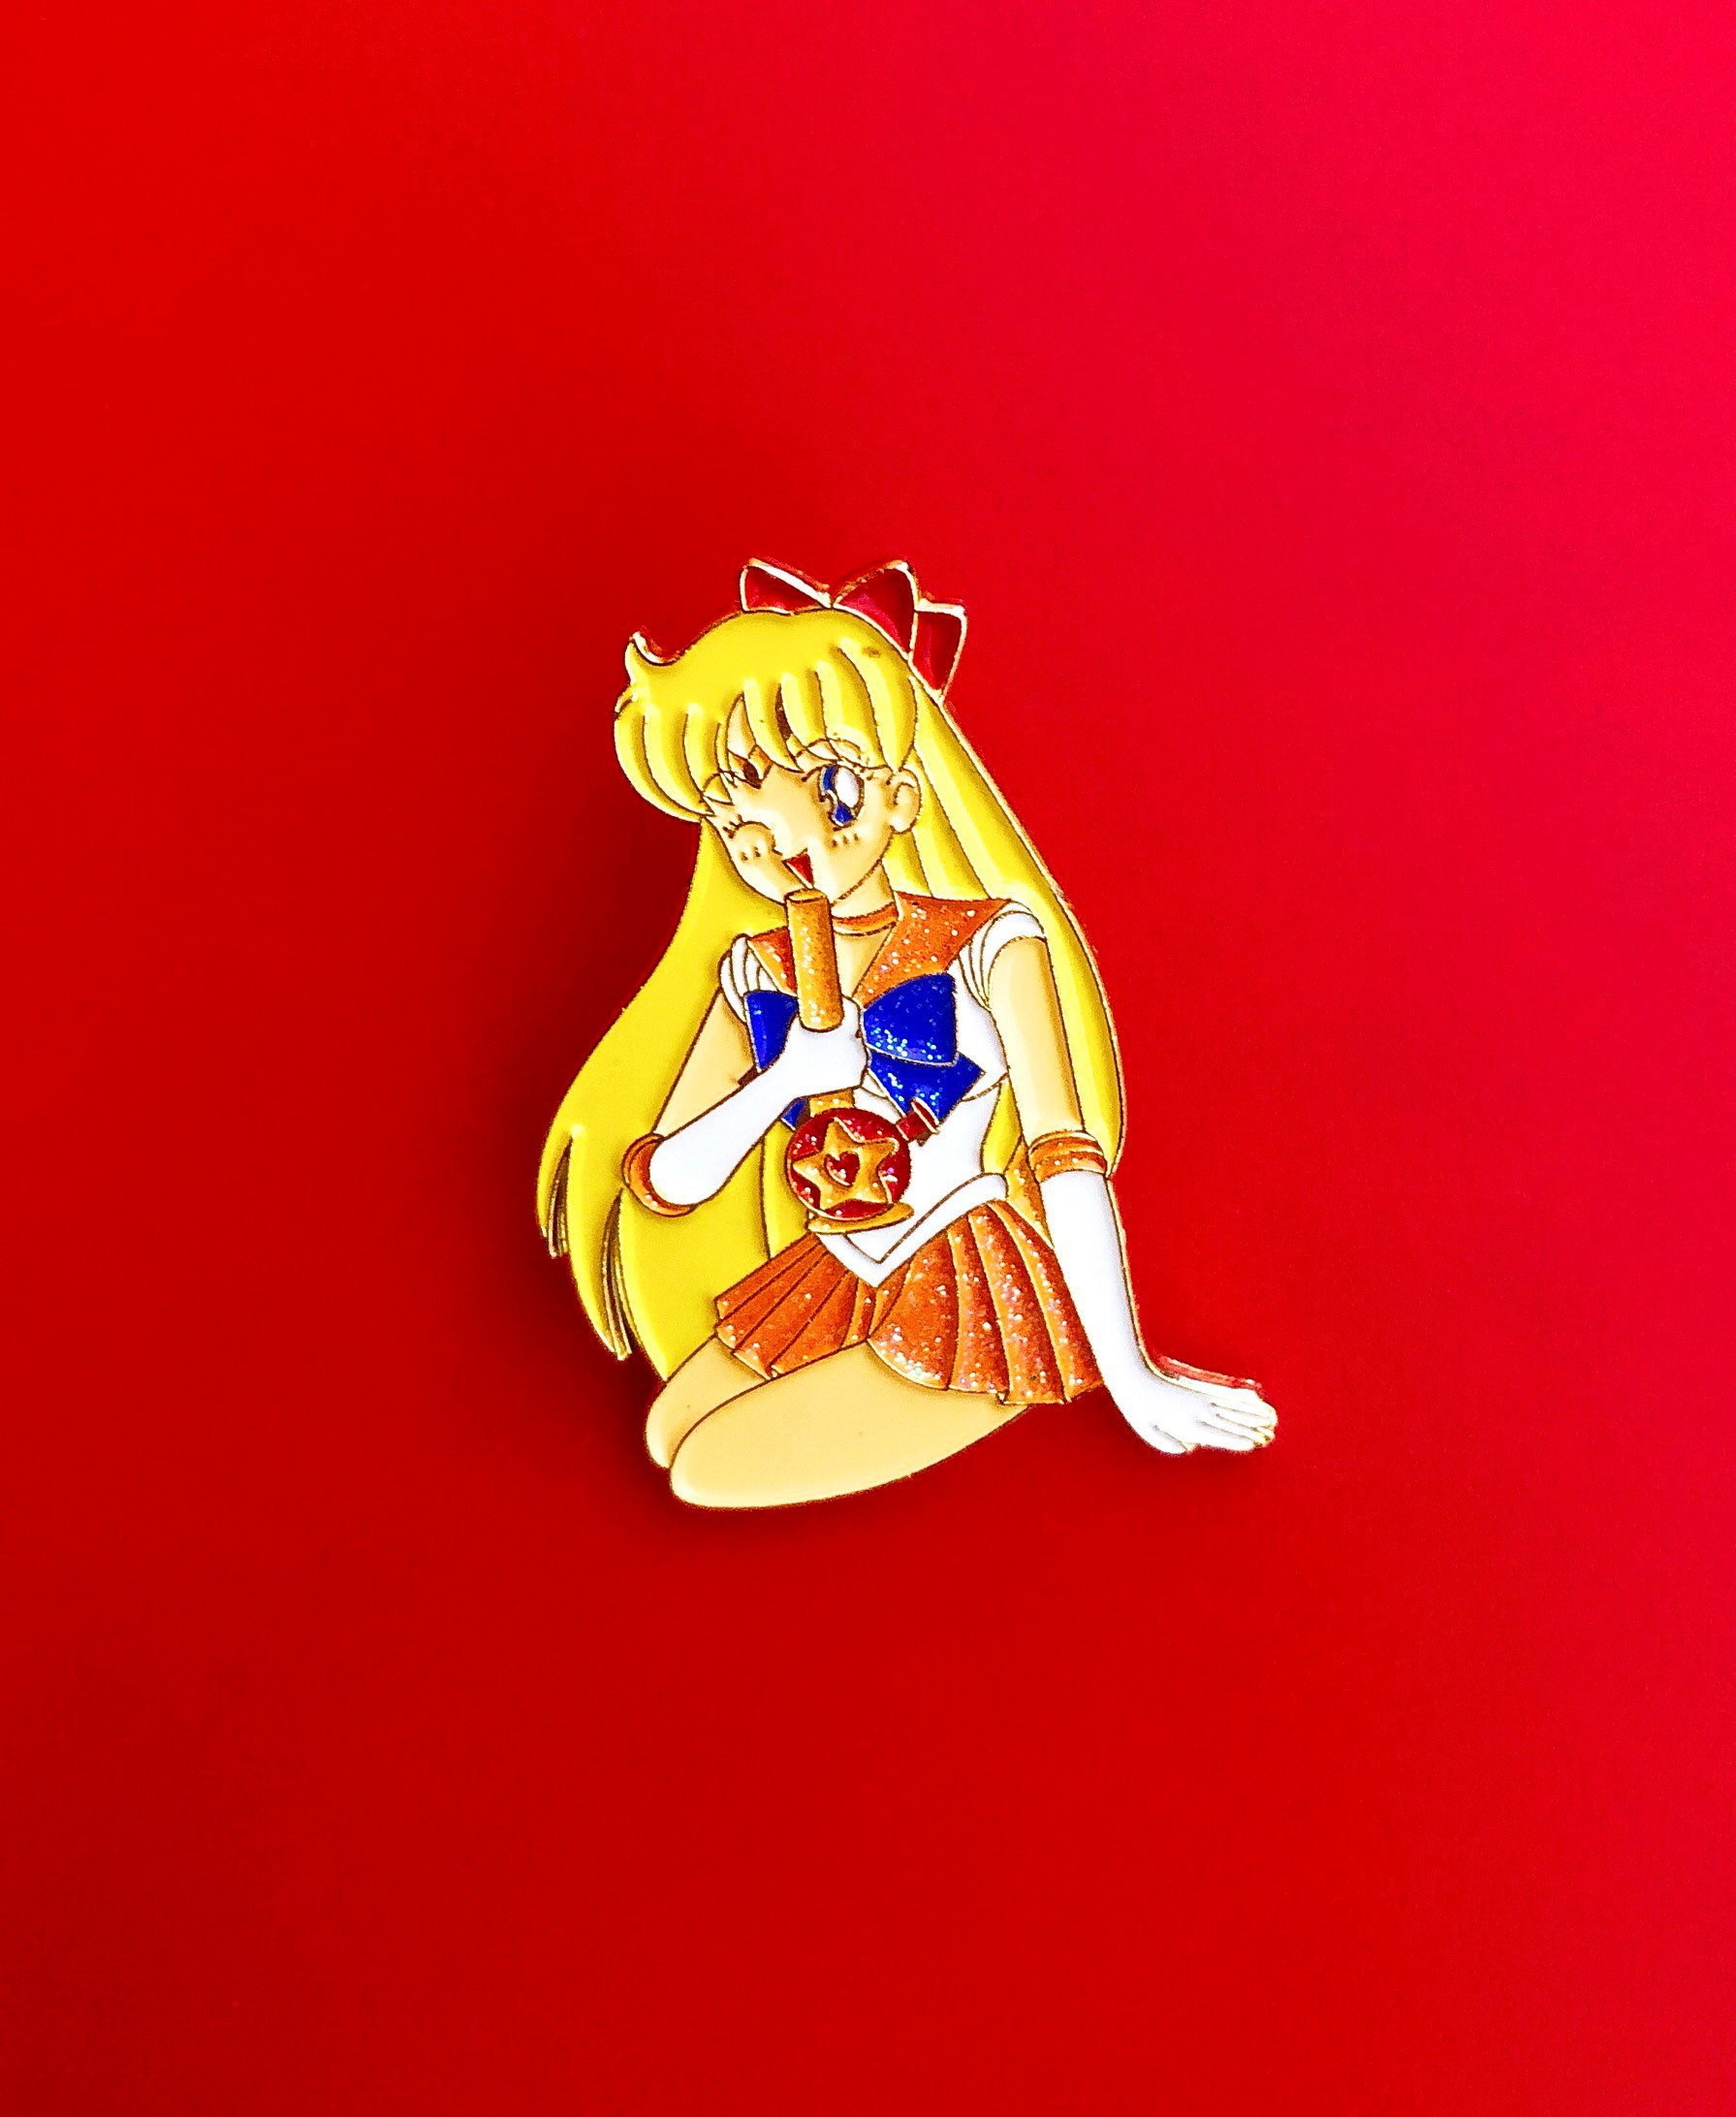 10 Lovable Lapel Pin Vase How to Use 2022 free download lapel pin vase how to use of sailor moon pin kawaii sailor venus pin cute pin etsy pertaining to dc29fc294c28ezoom